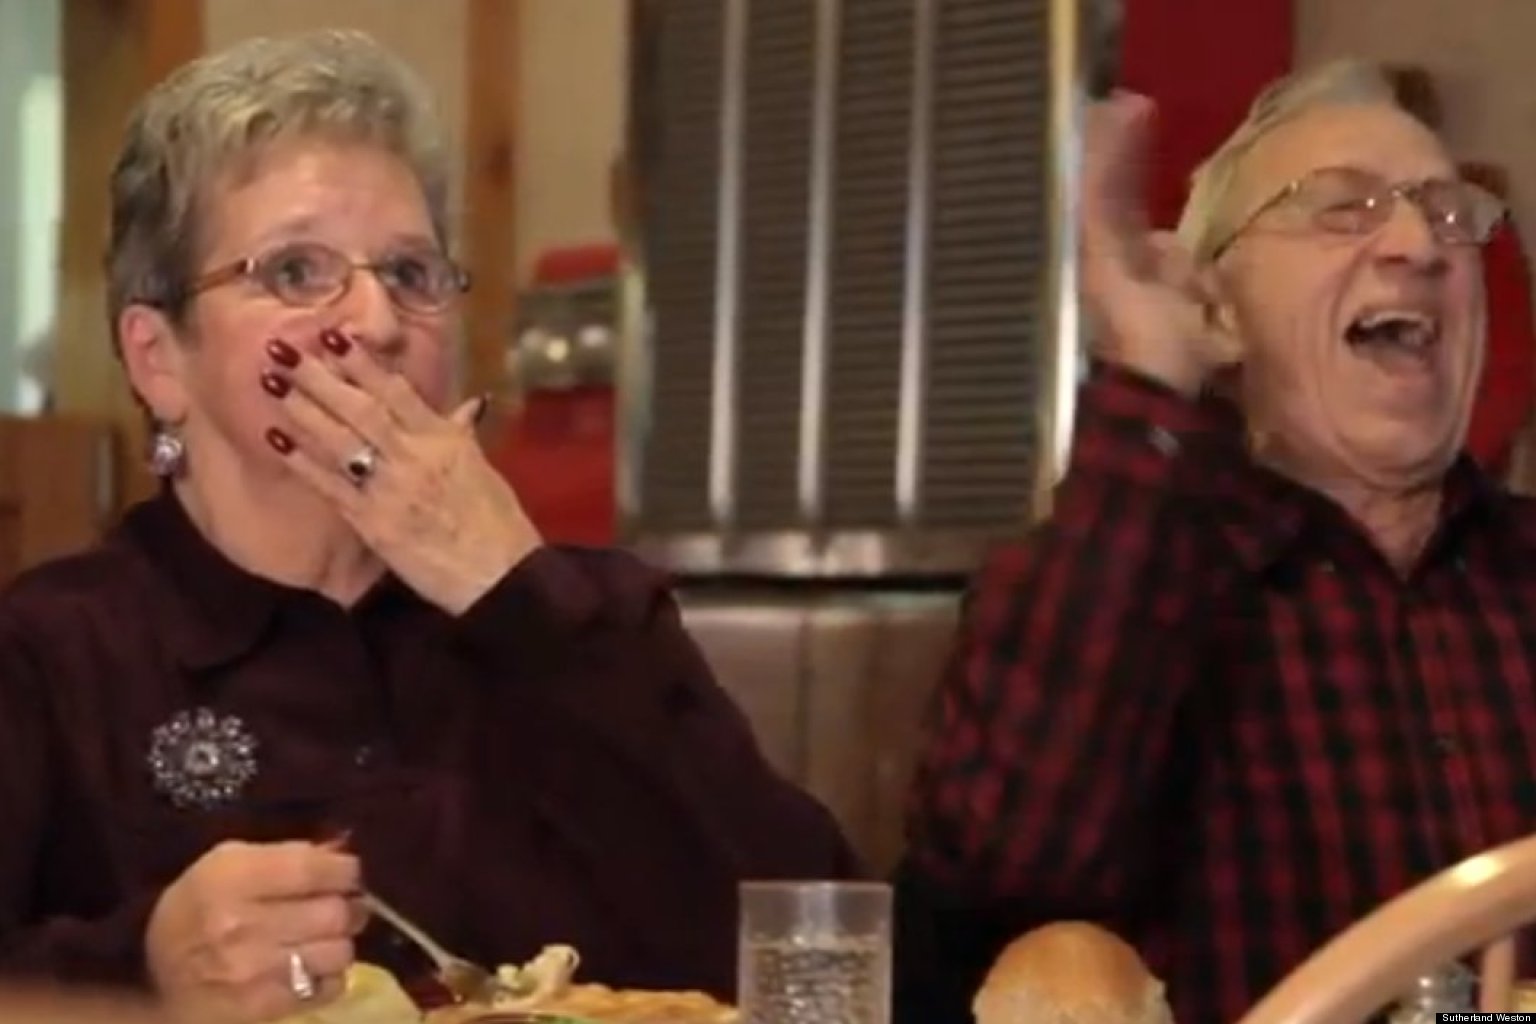 Baked In A Buttery Flaky Crust Dysarts Restaurant Ad Outtakes Are Hilarious And 8323